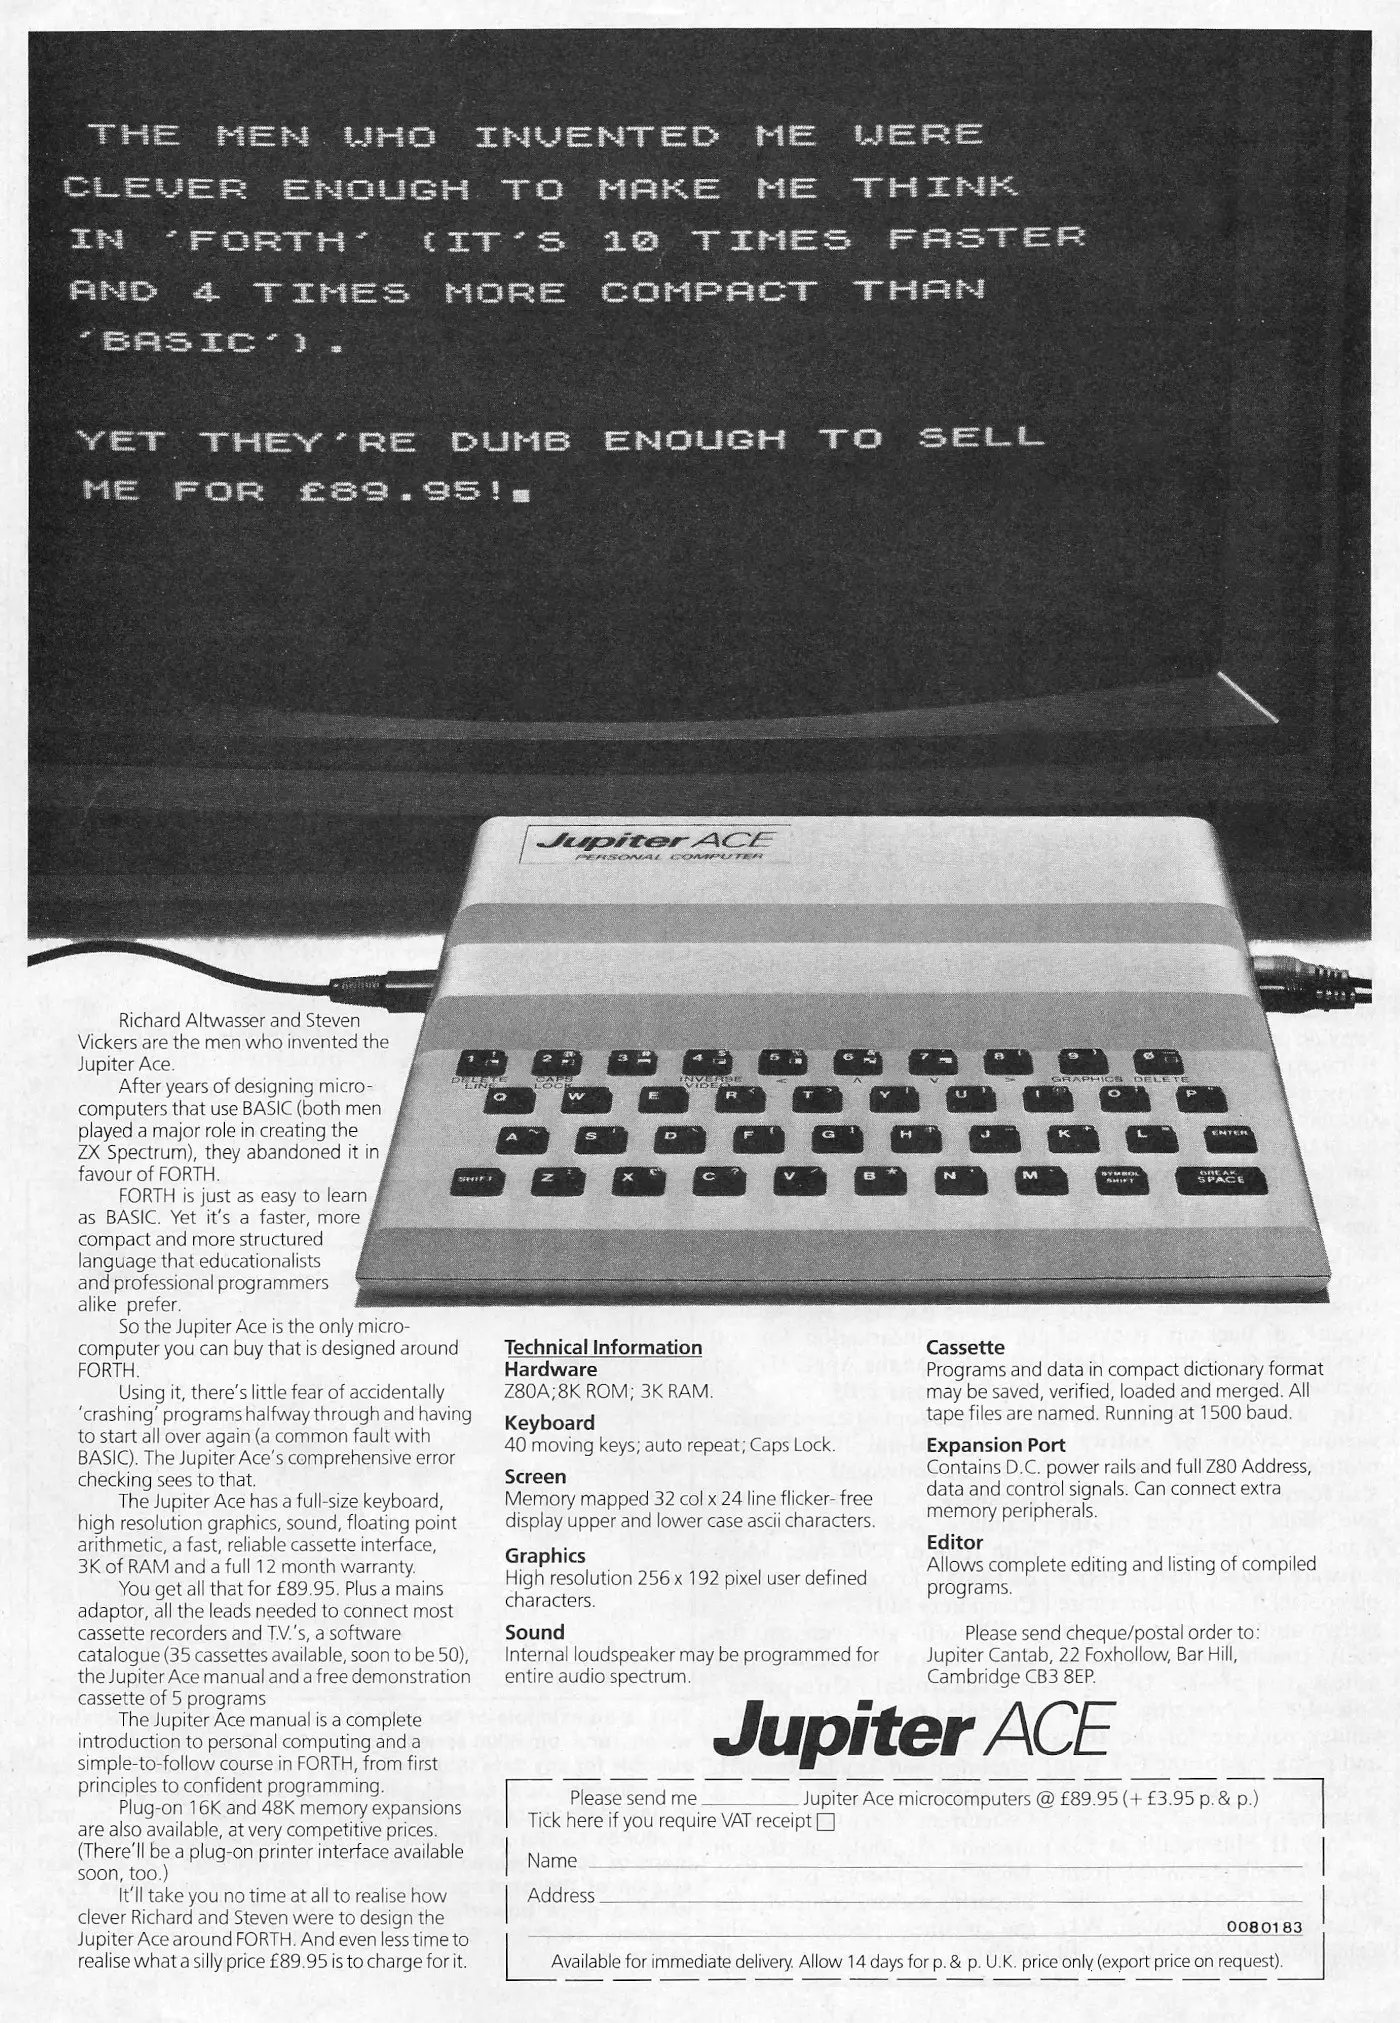 Jupiter Cantab Advert: The Jupiter Ace: Clever enough for Forth, dumb enough to sell for £90, from Practical Computing, May 1983